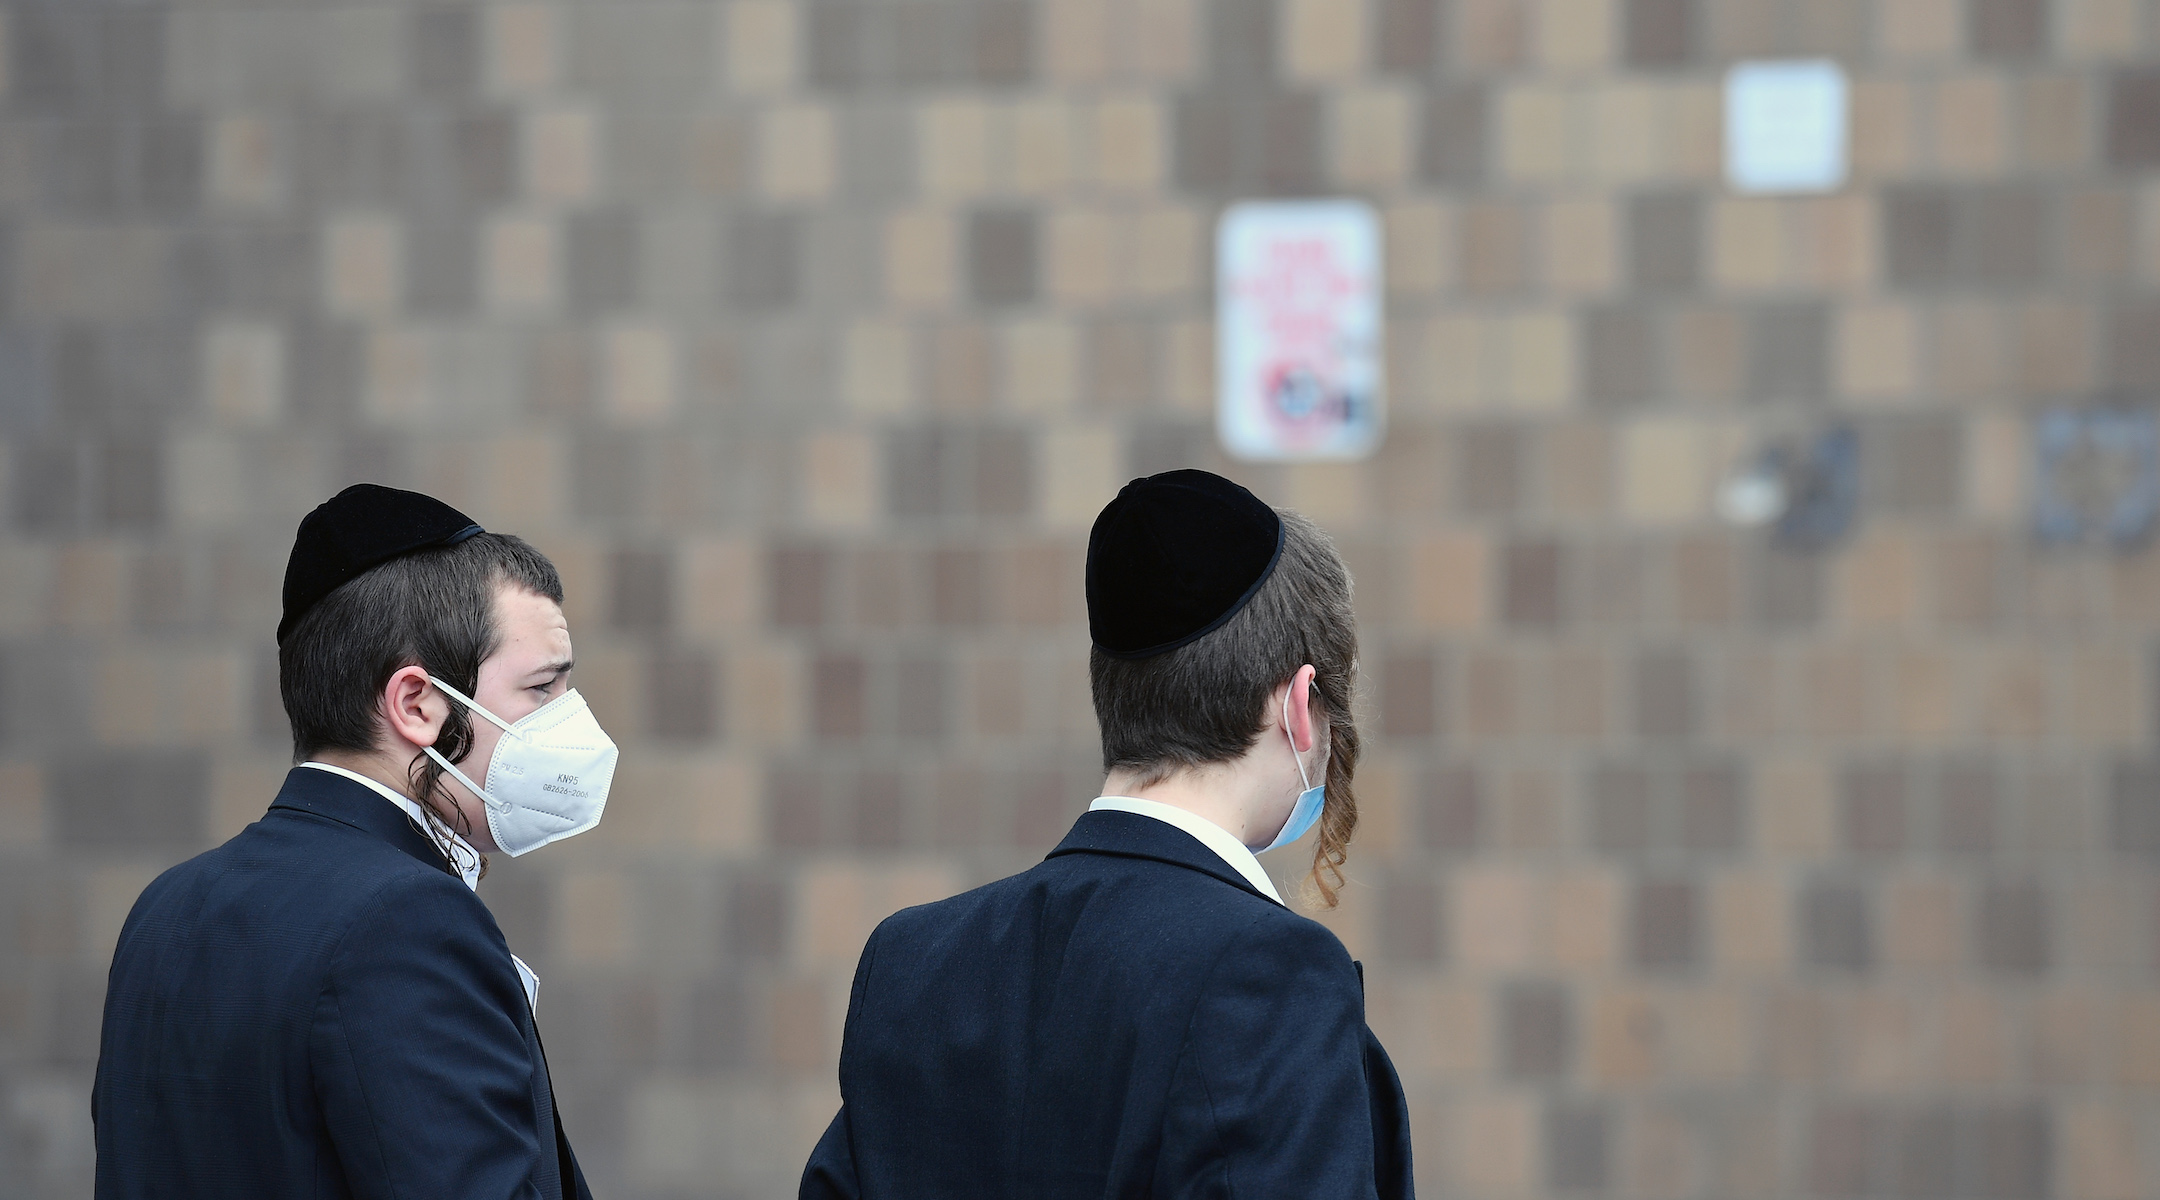 Two Orthodox men wear facemasks in New York City on March 31, 2020. The new coronavirus has spread at an especially high rate through Orthodox neighborhoods in New York. (Angela Weiss/AFP via Getty Images)